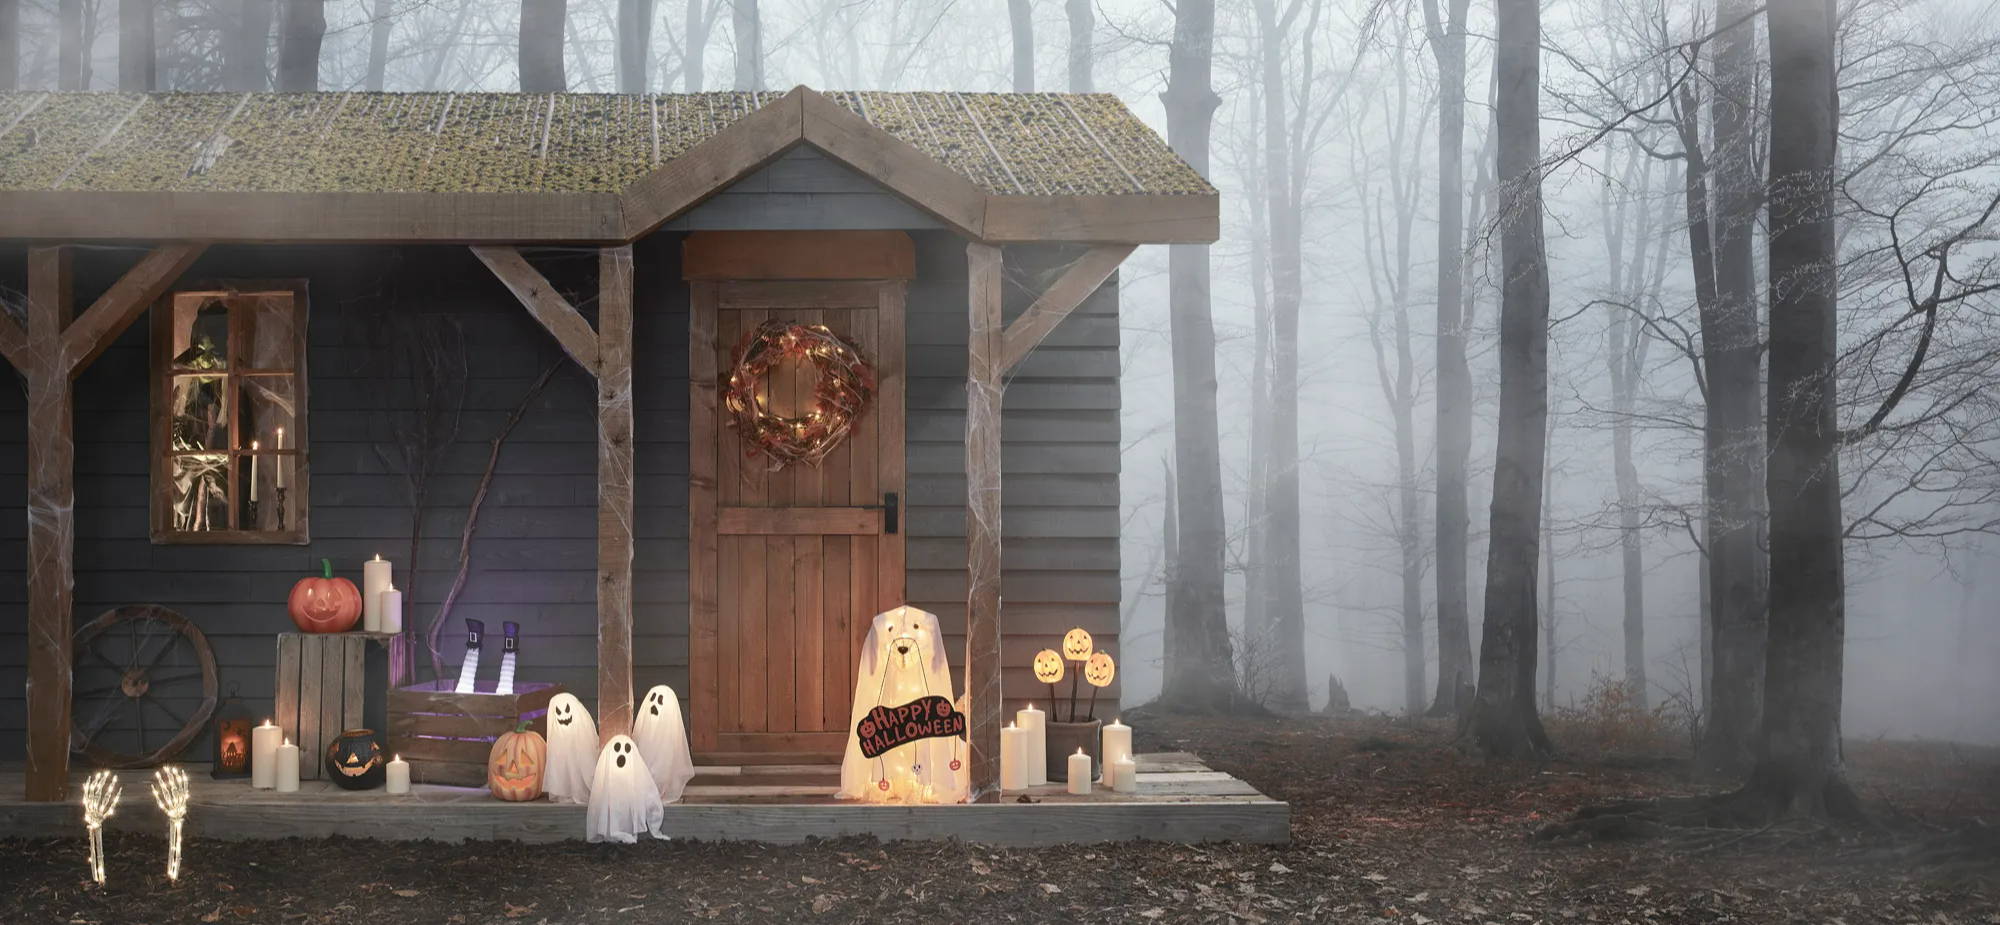 A spooky Halloween house setting in a forest with witches, ghost dogs, stake light and pumpkins.